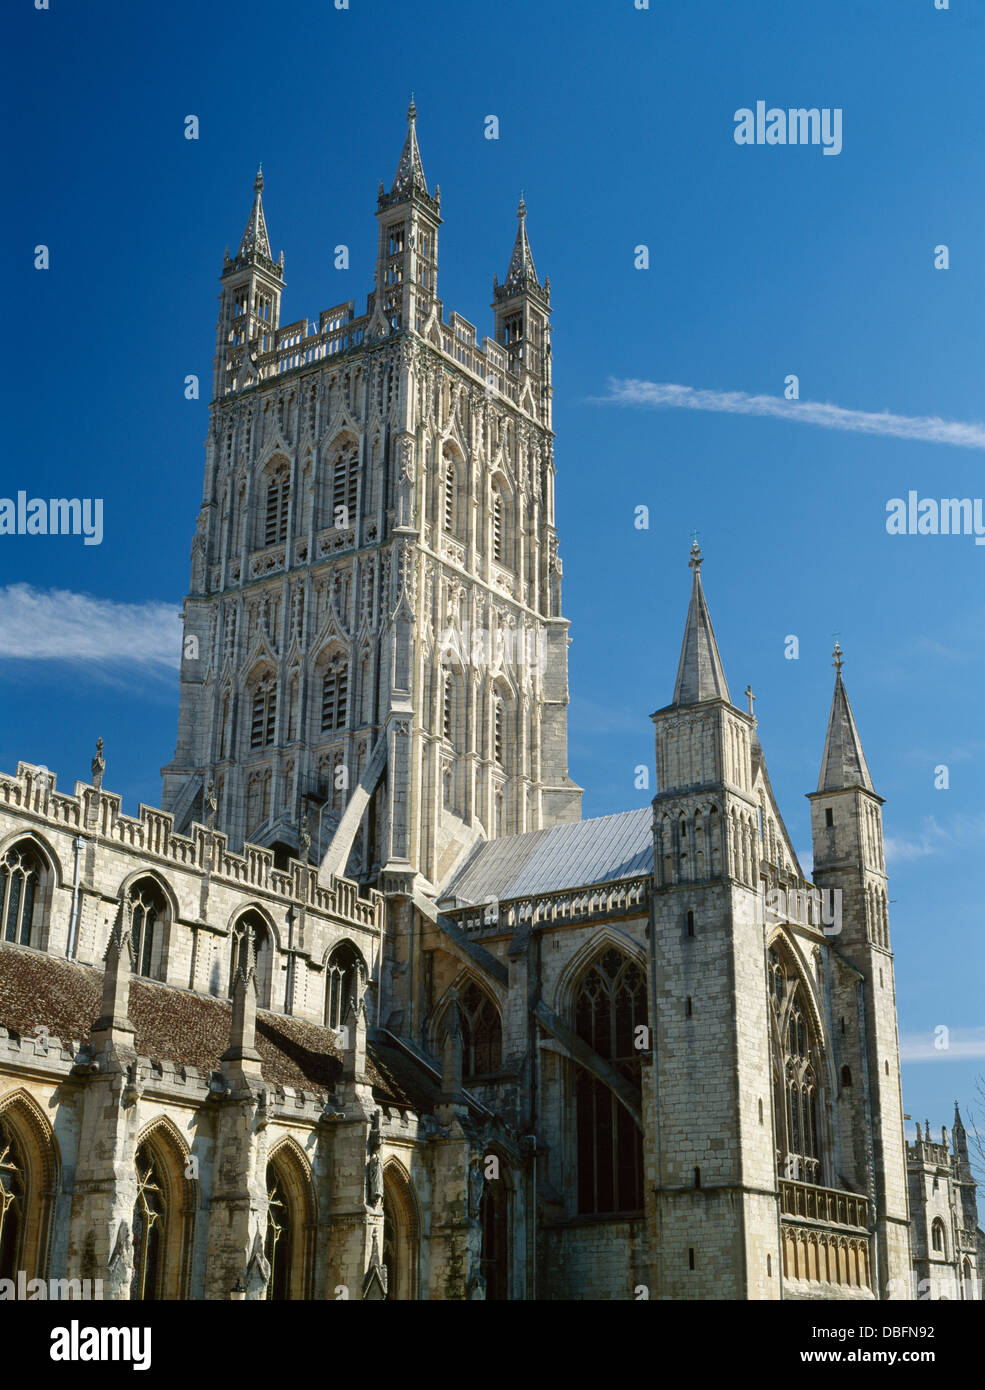 Perpendicular central tower (c 1450) and Norman S transept turrets of Gloucester Cathedral, England, the former Benedictine abbey of St Peter. Stock Photo